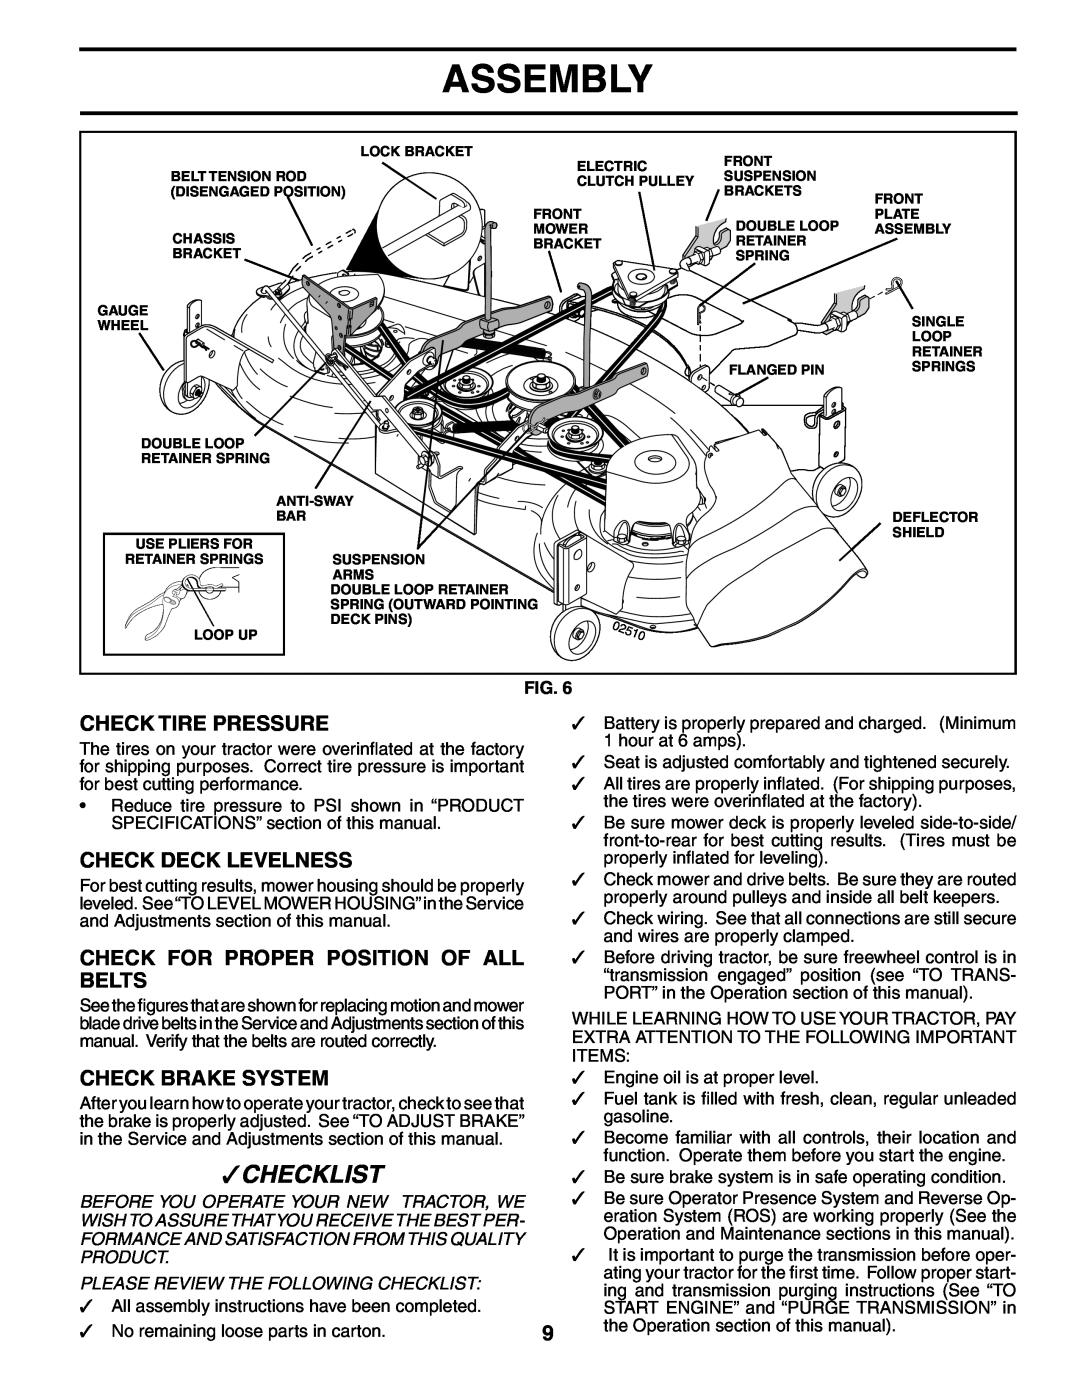 Poulan 195854 manual Check Tire Pressure, Check Deck Levelness, Check For Proper Position Of All Belts, Check Brake System 